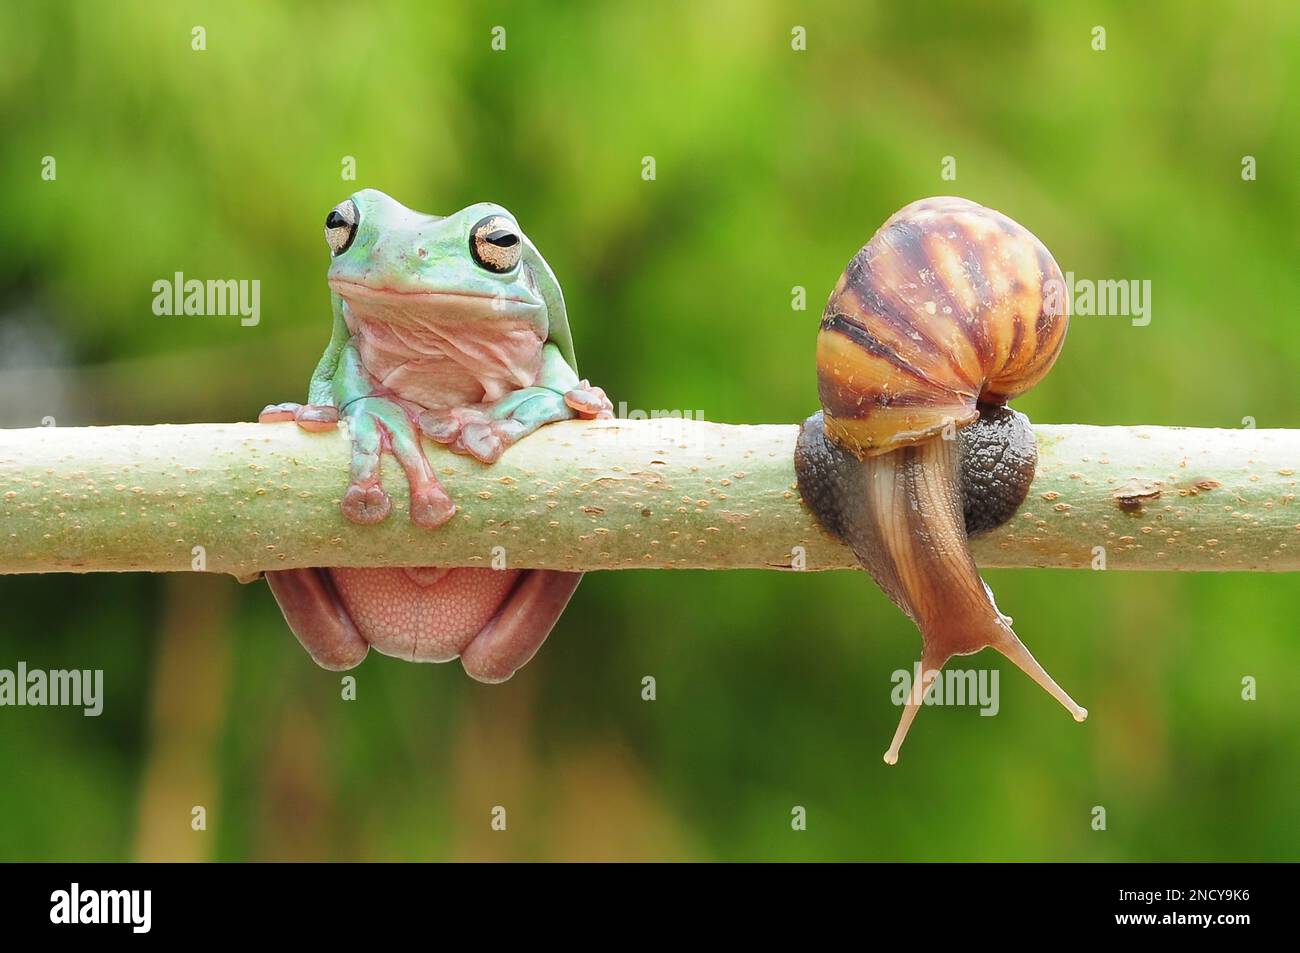 Close-up of an Australian green tree frog sitting next to a snail on a branch, Indonesia Stock Photo